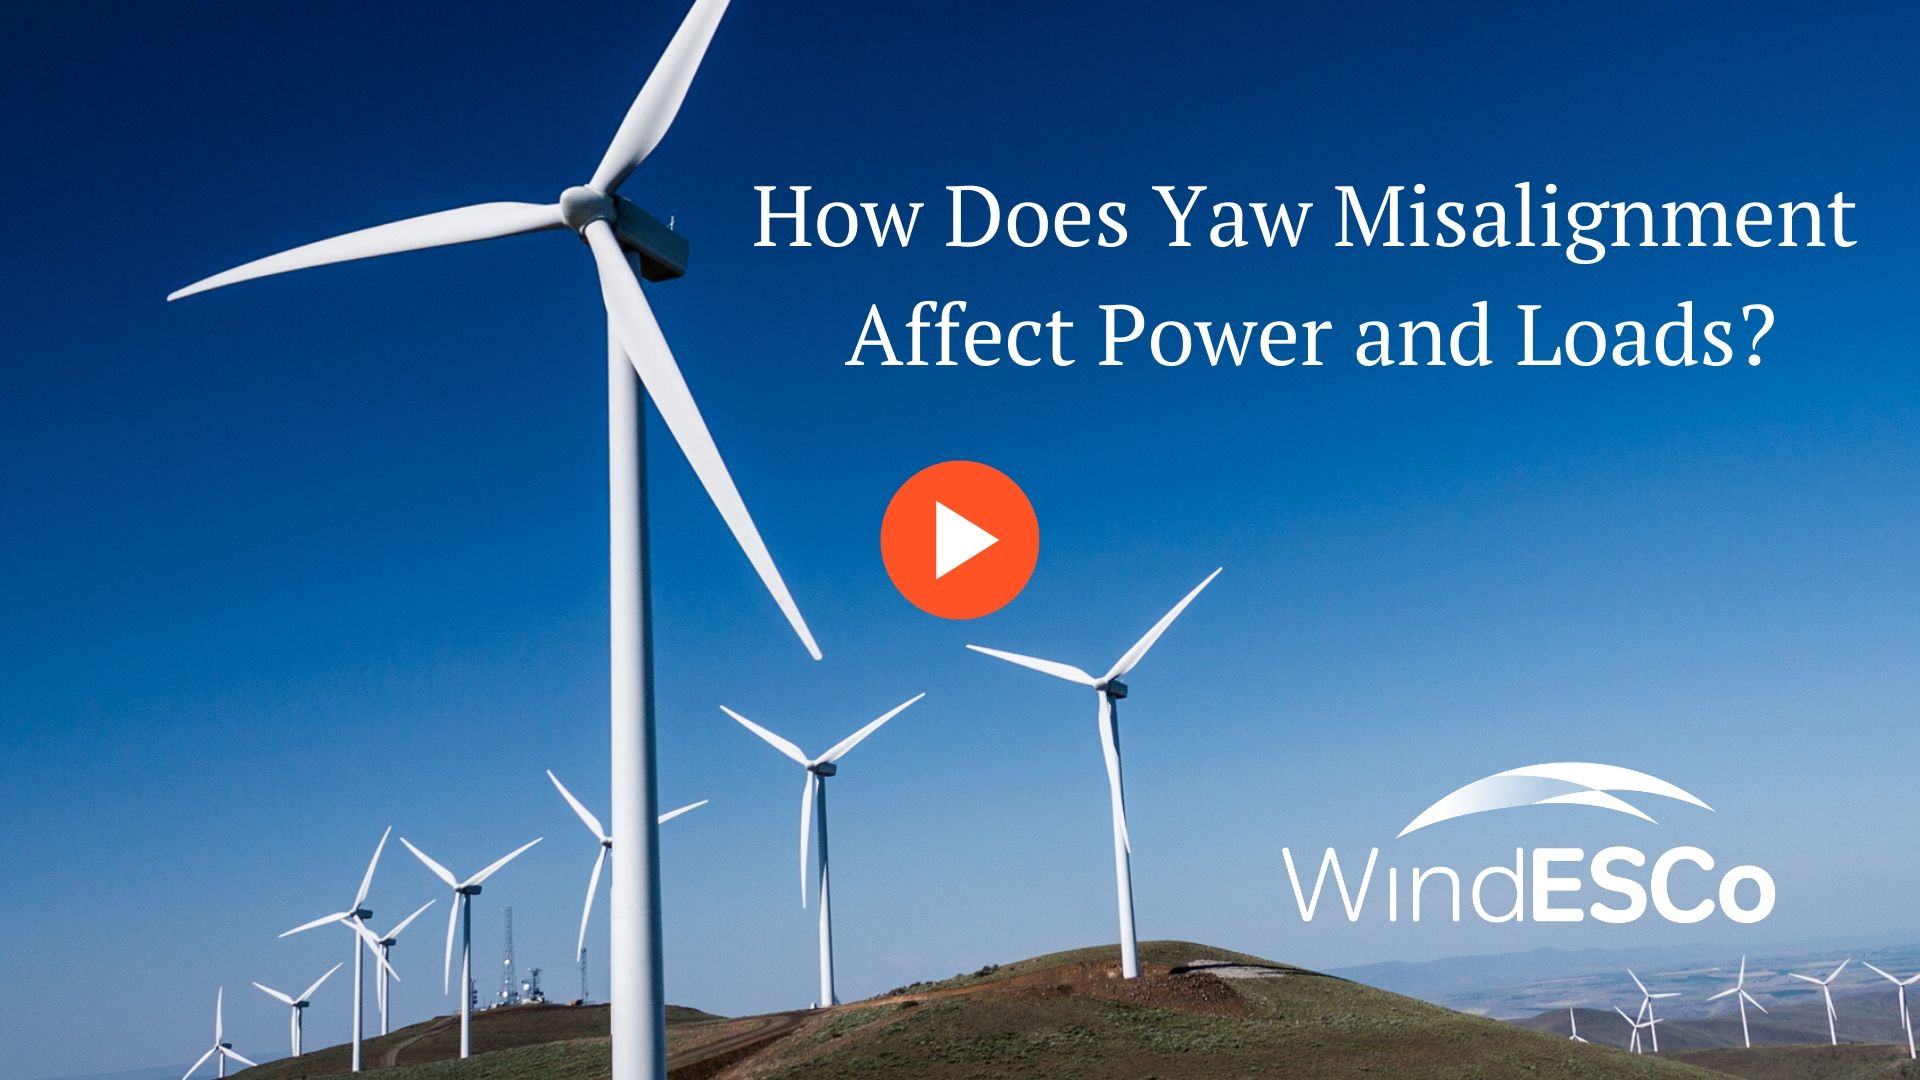 How Does Yaw Misalignment Affect Power and Loads?